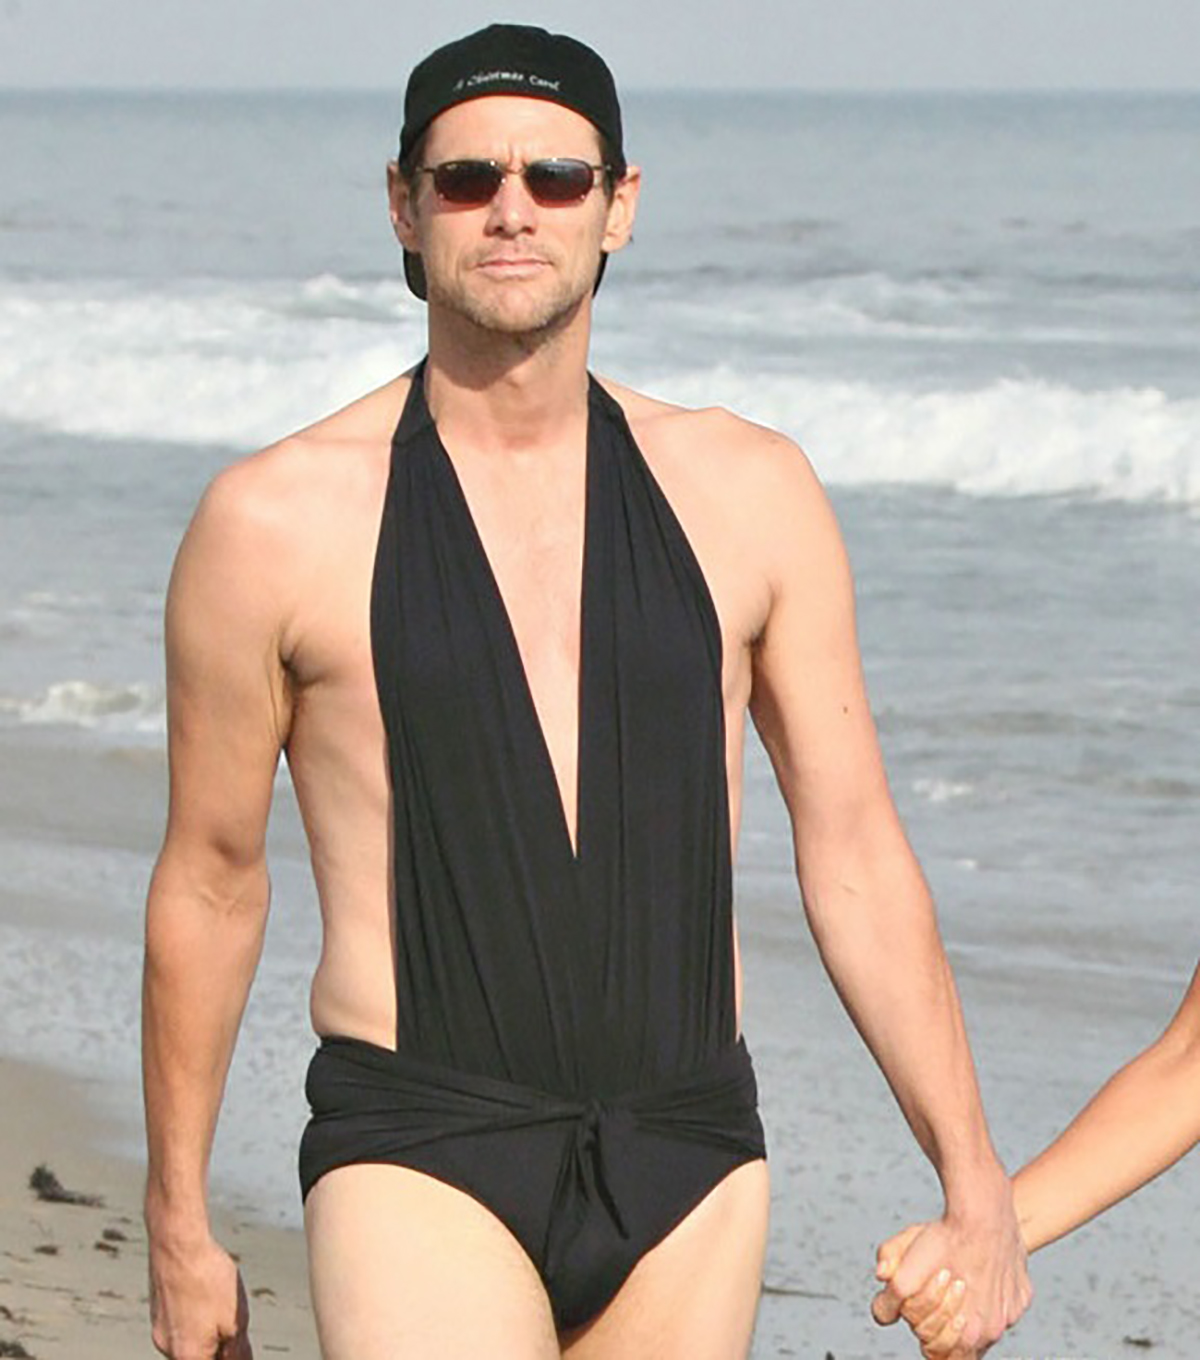 Jim Carrey staring at the paparazzi while wearing Jenny McCarthy's bathing suit in 2008.